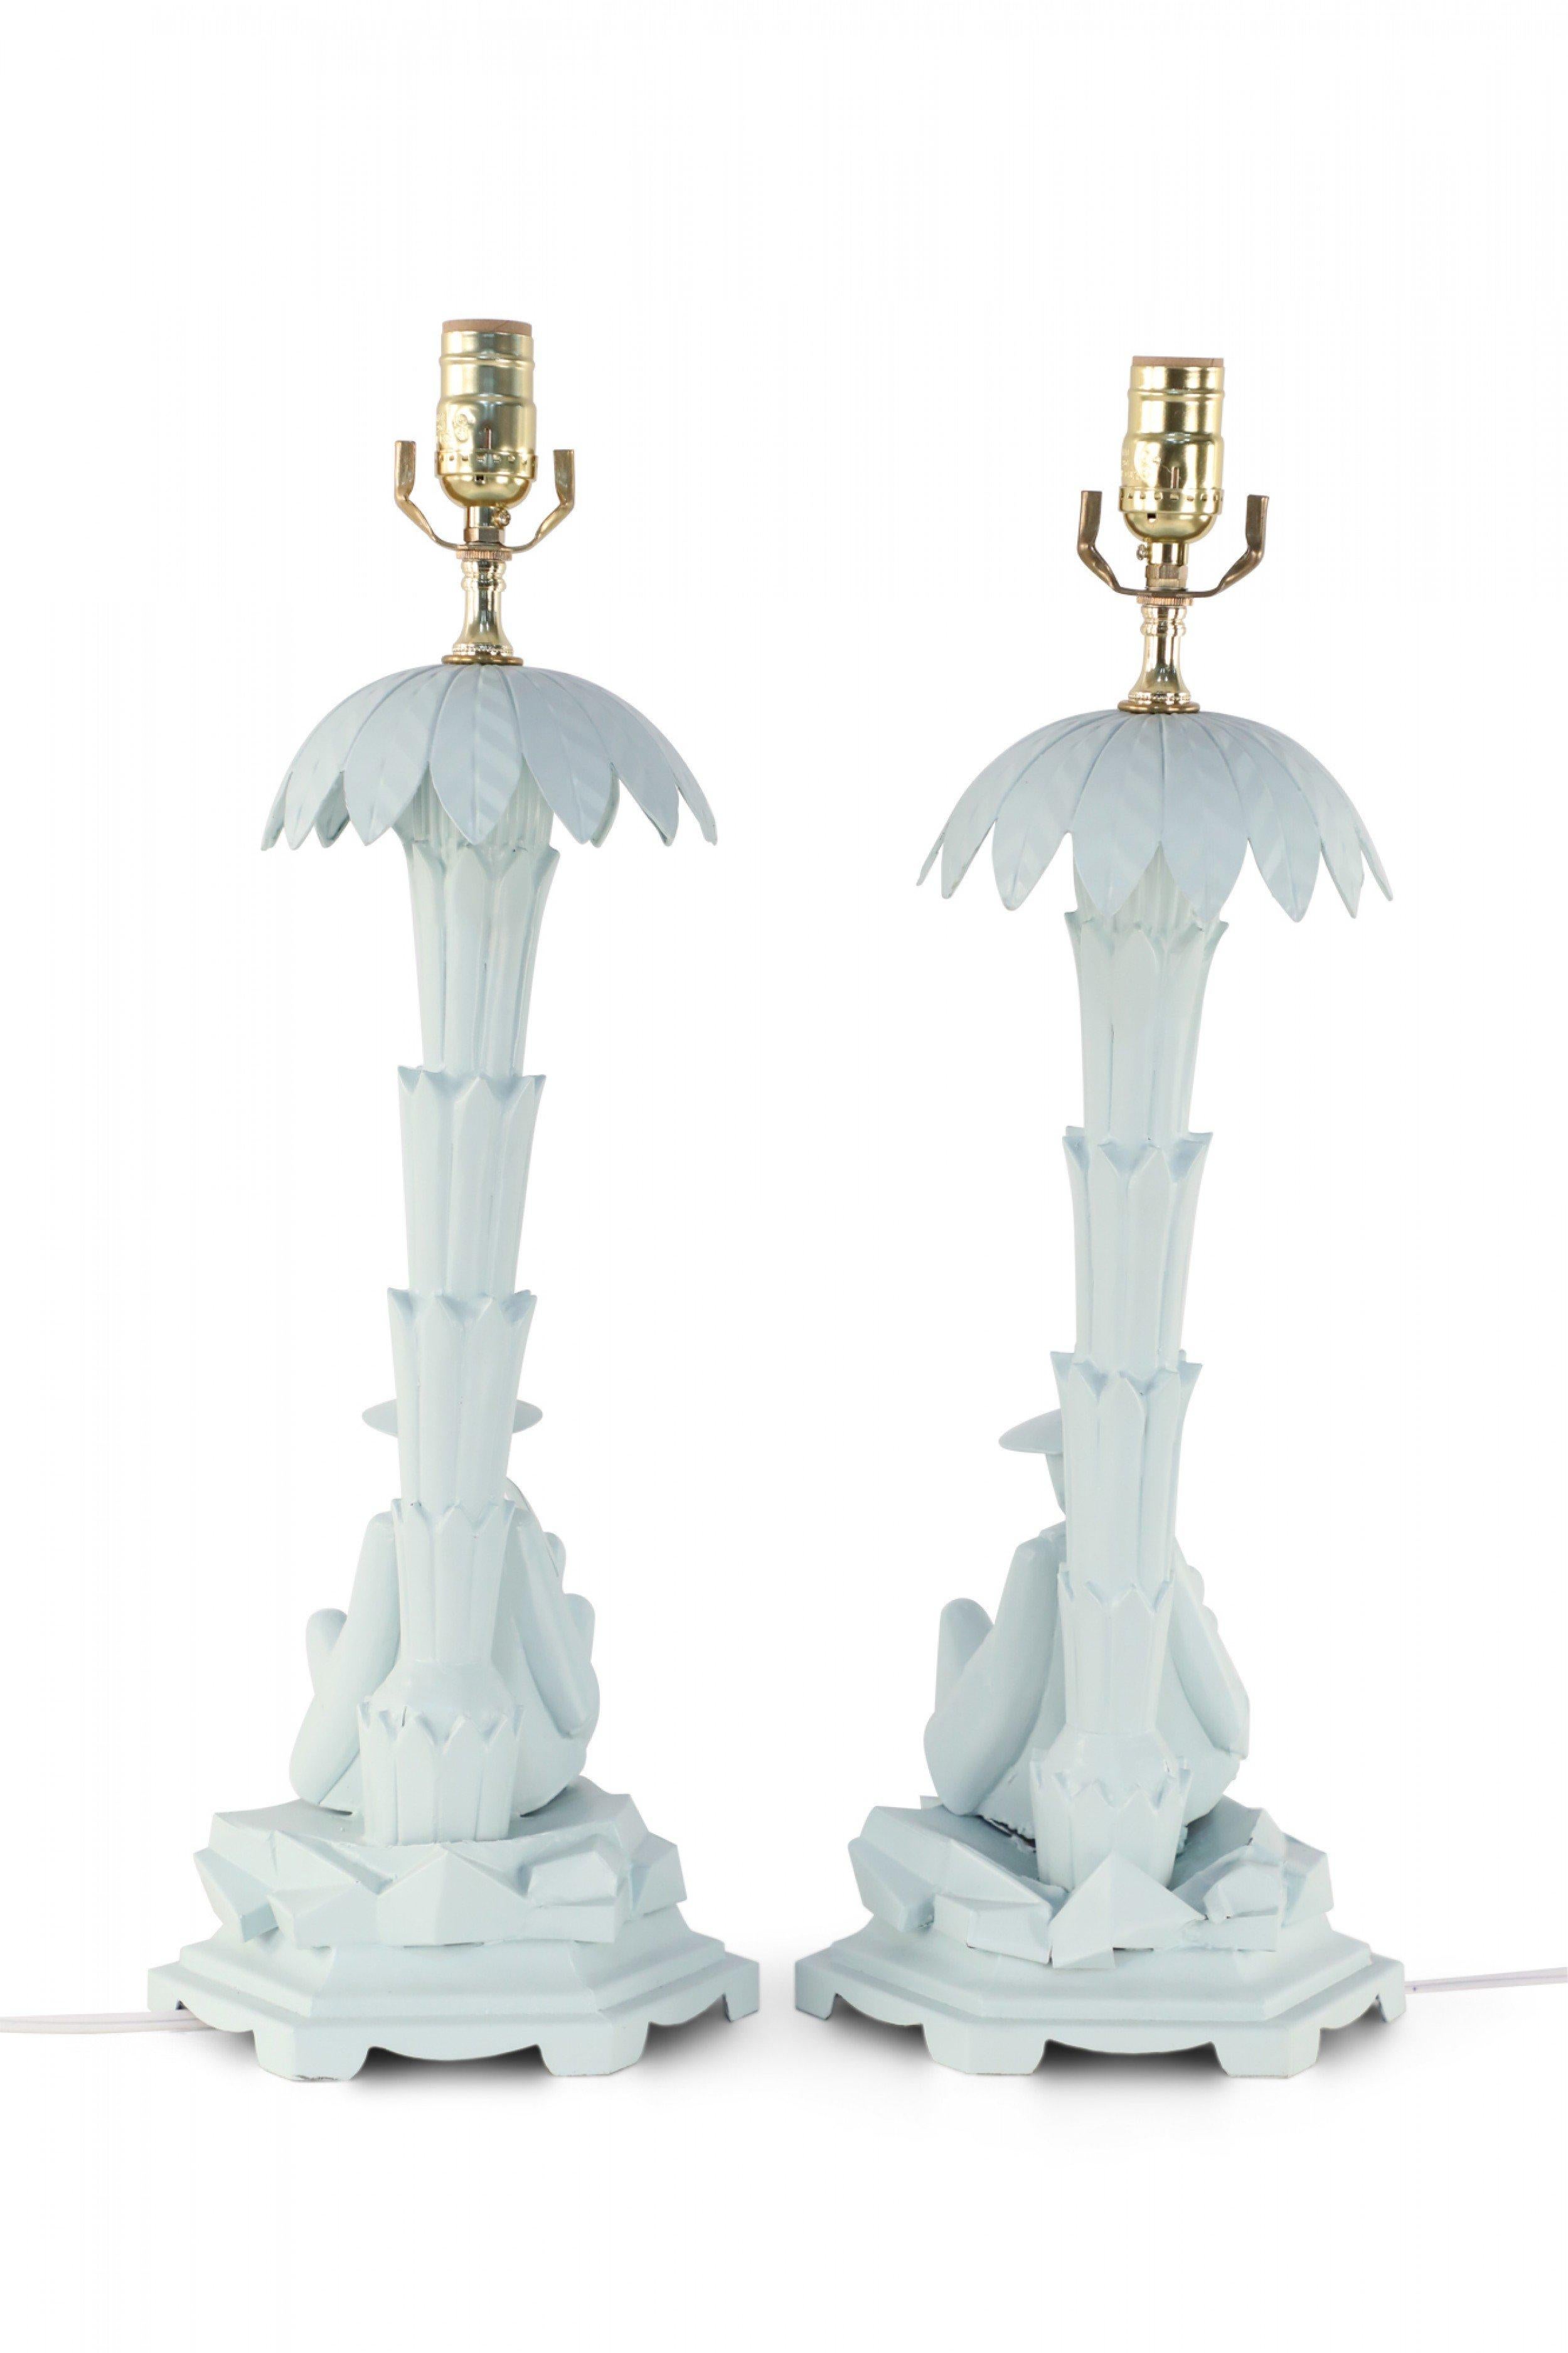 Pair of Chinese light blue tole table lamps depicting a man holding a fan sitting in the shade of a palm tree. (PRICED AS PAIR).
 